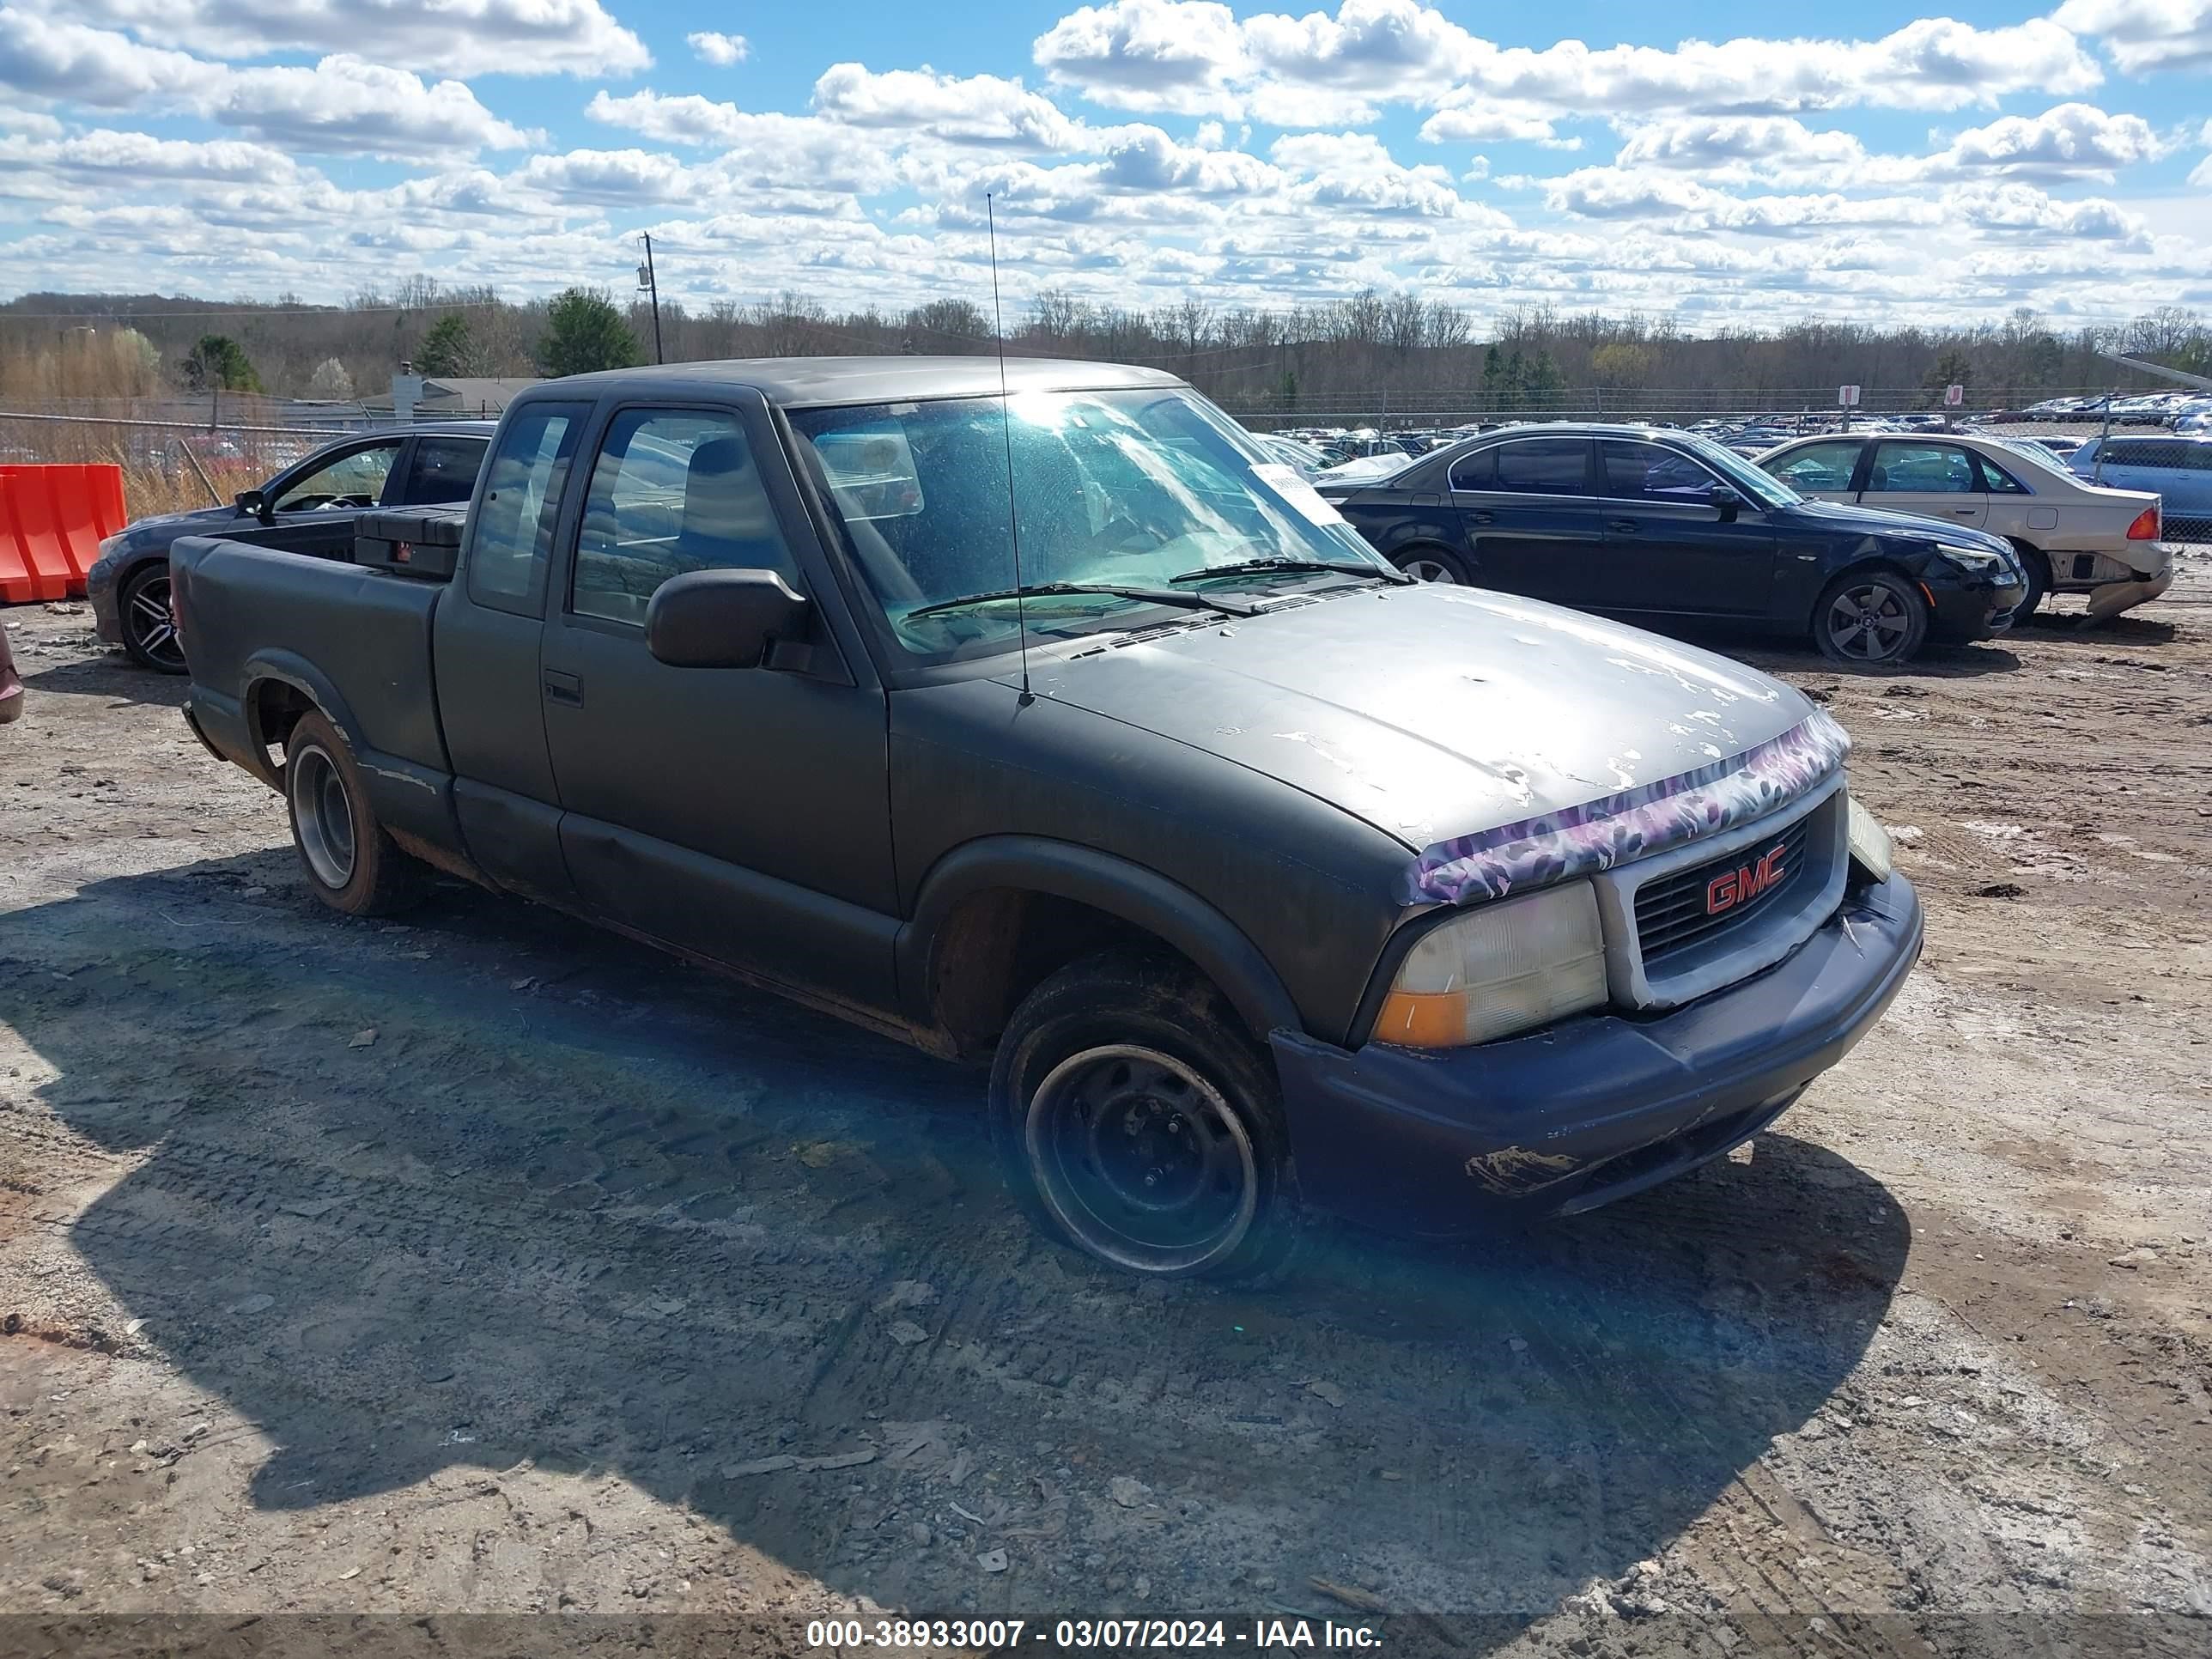 vin: 1GTCS19H738153549 1GTCS19H738153549 2003 gmc sonoma 2200 for Sale in 29681, 422 Scuffletown Rd, Simpsonville, South Carolina, USA